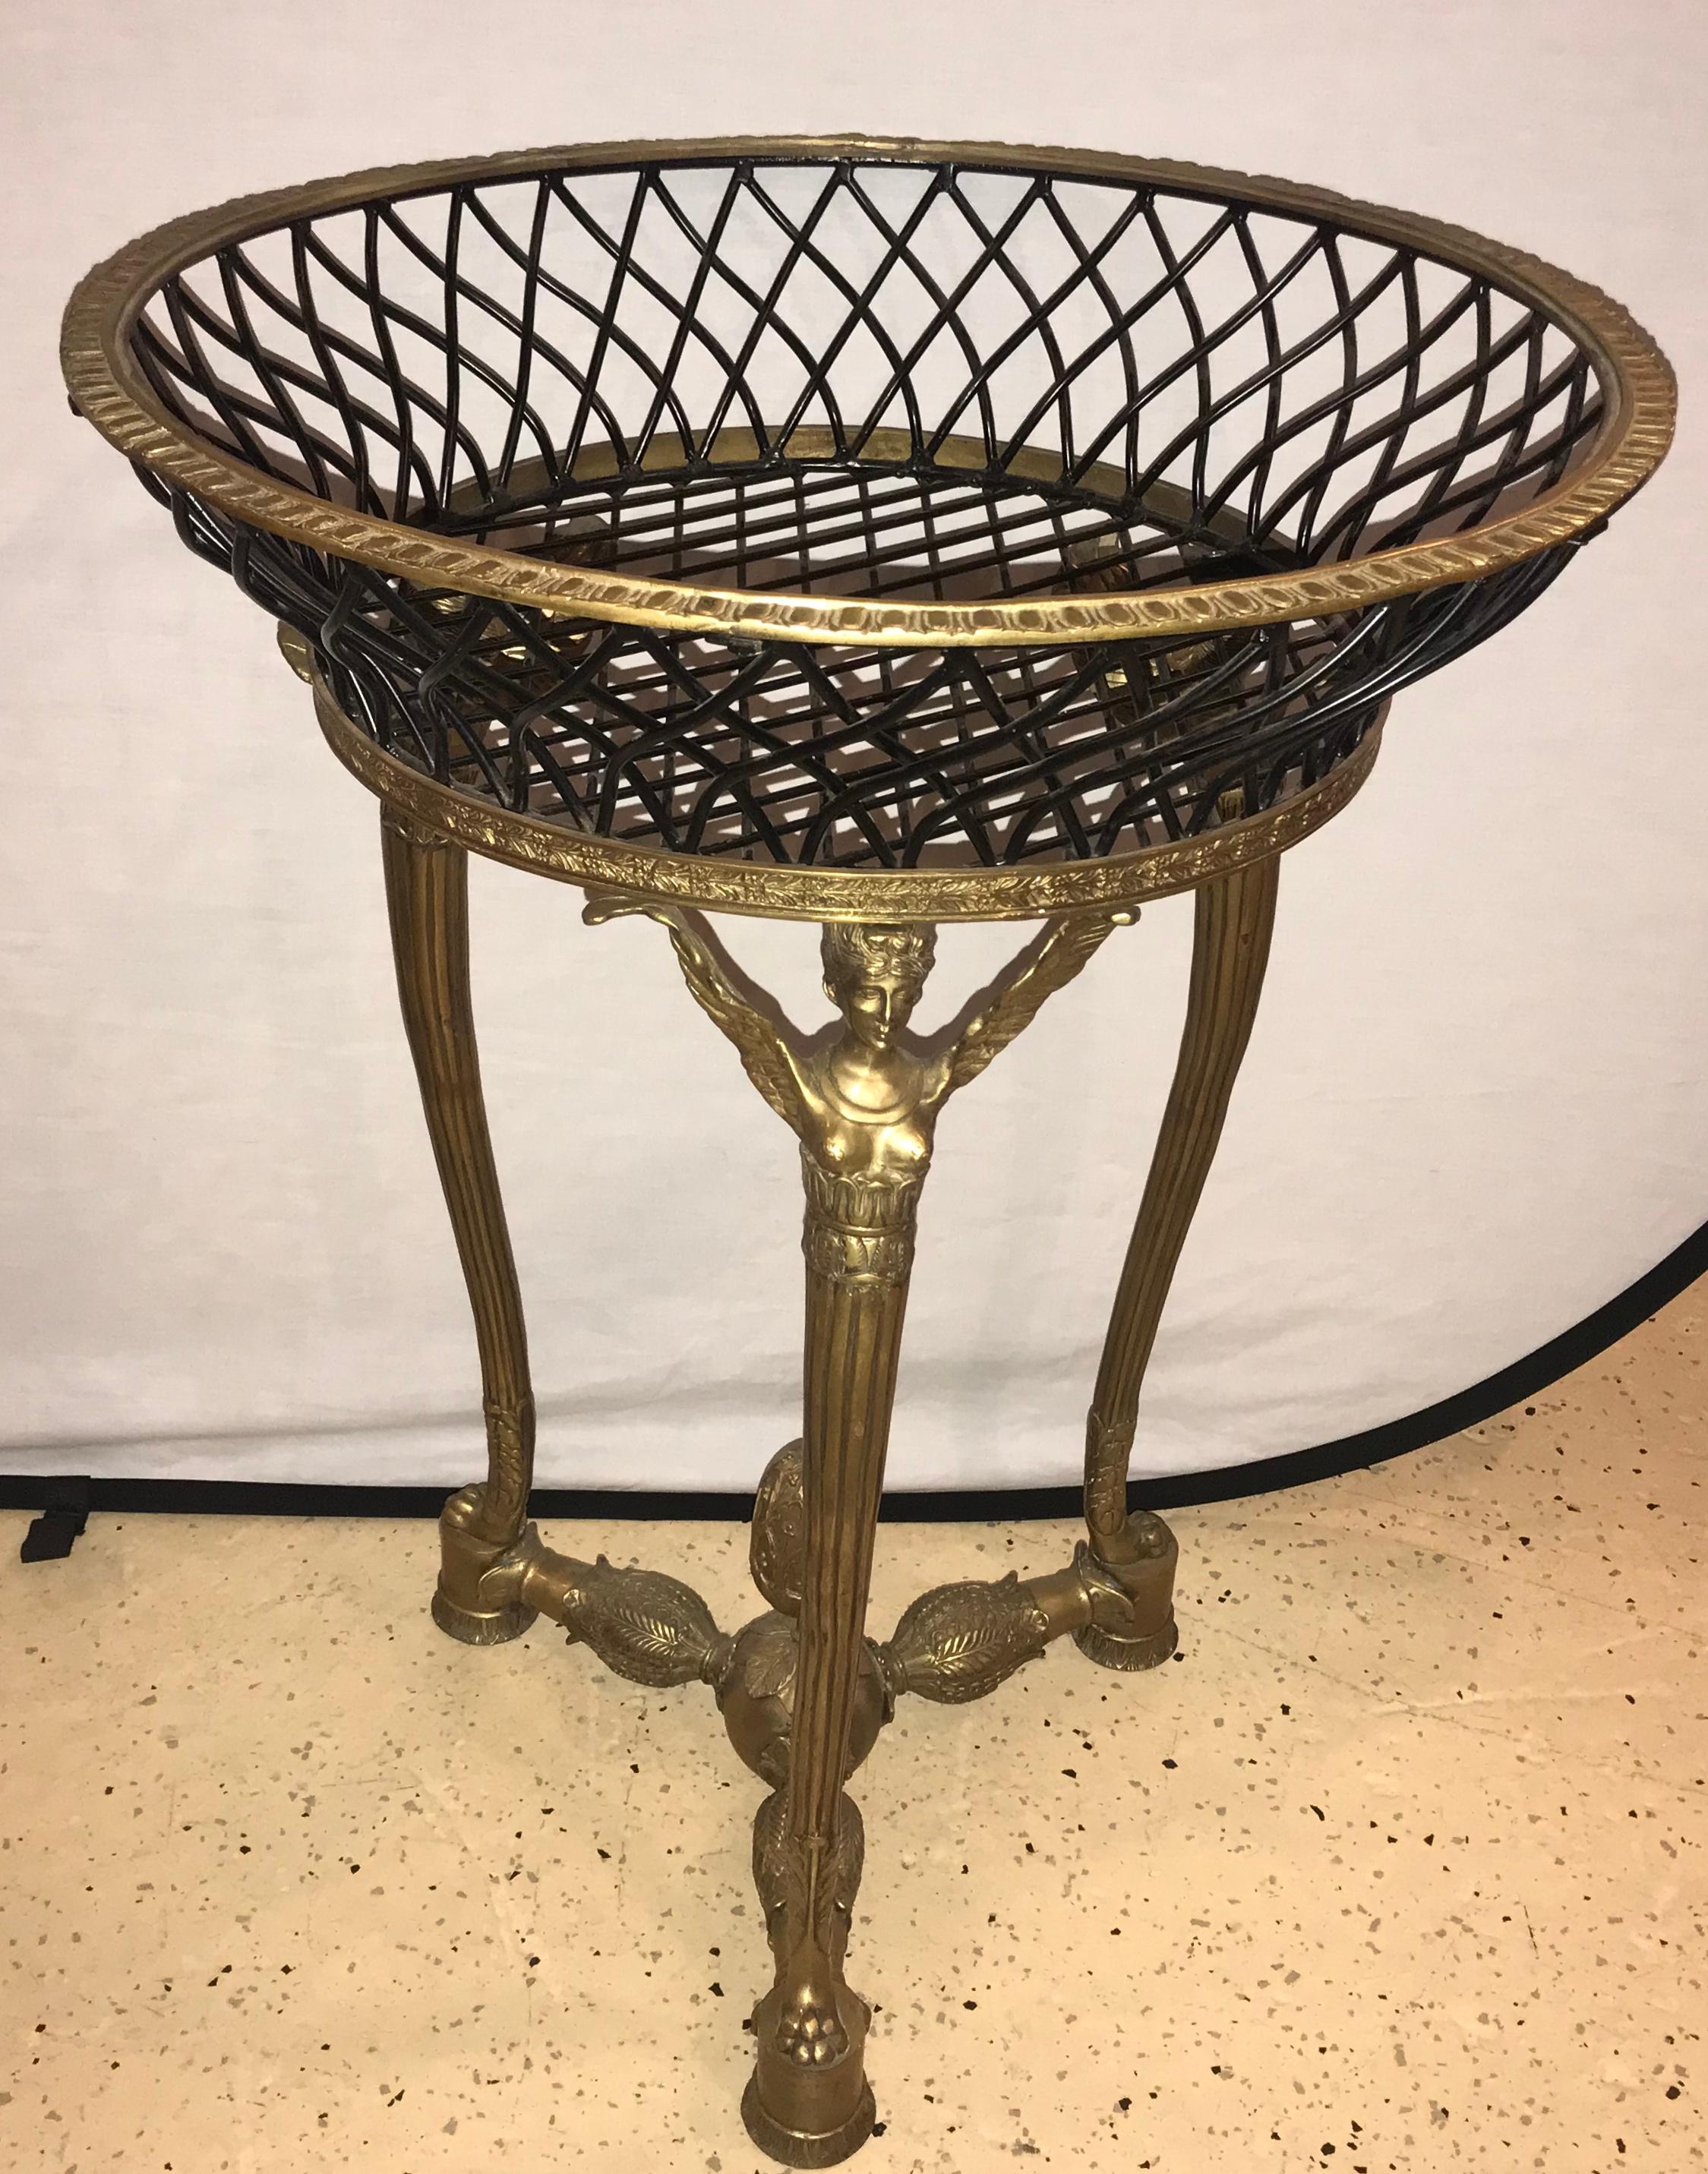 French 19th-20th Early Empire Bronze Basket or Jardinière on Figural Gilt Bronze Stand